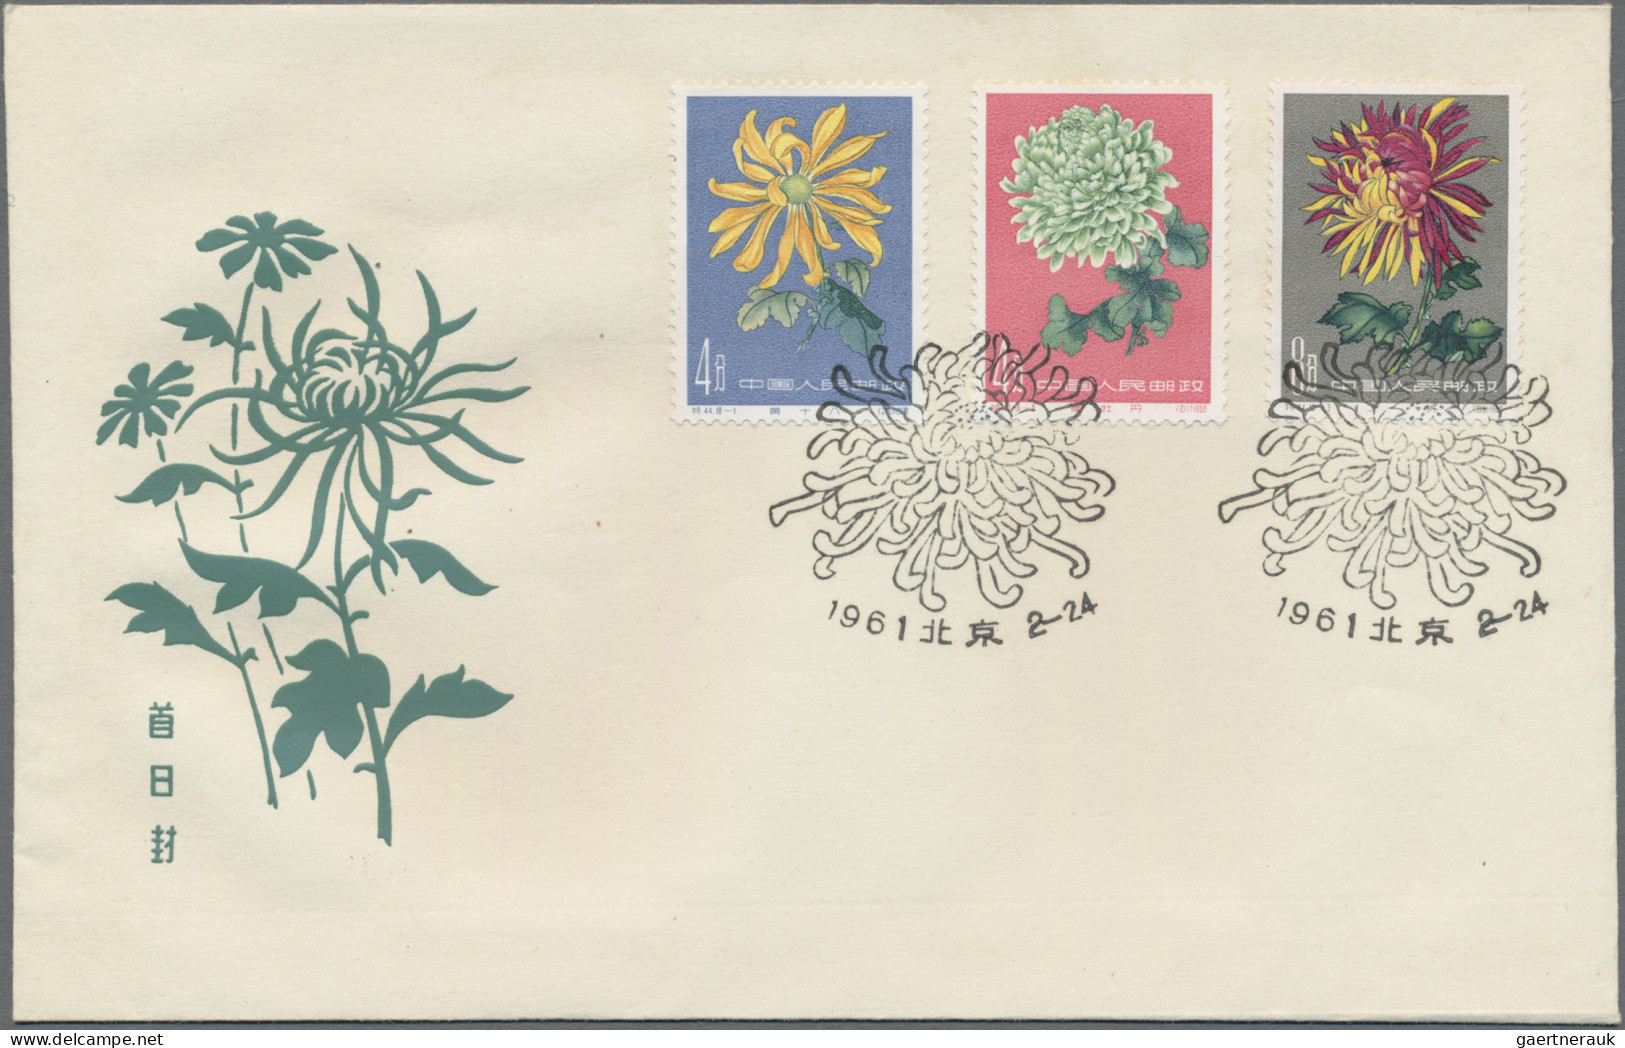 China (PRC): 1960/61, Chrysanthemum (S44), six unaddressed cacheted official FDC